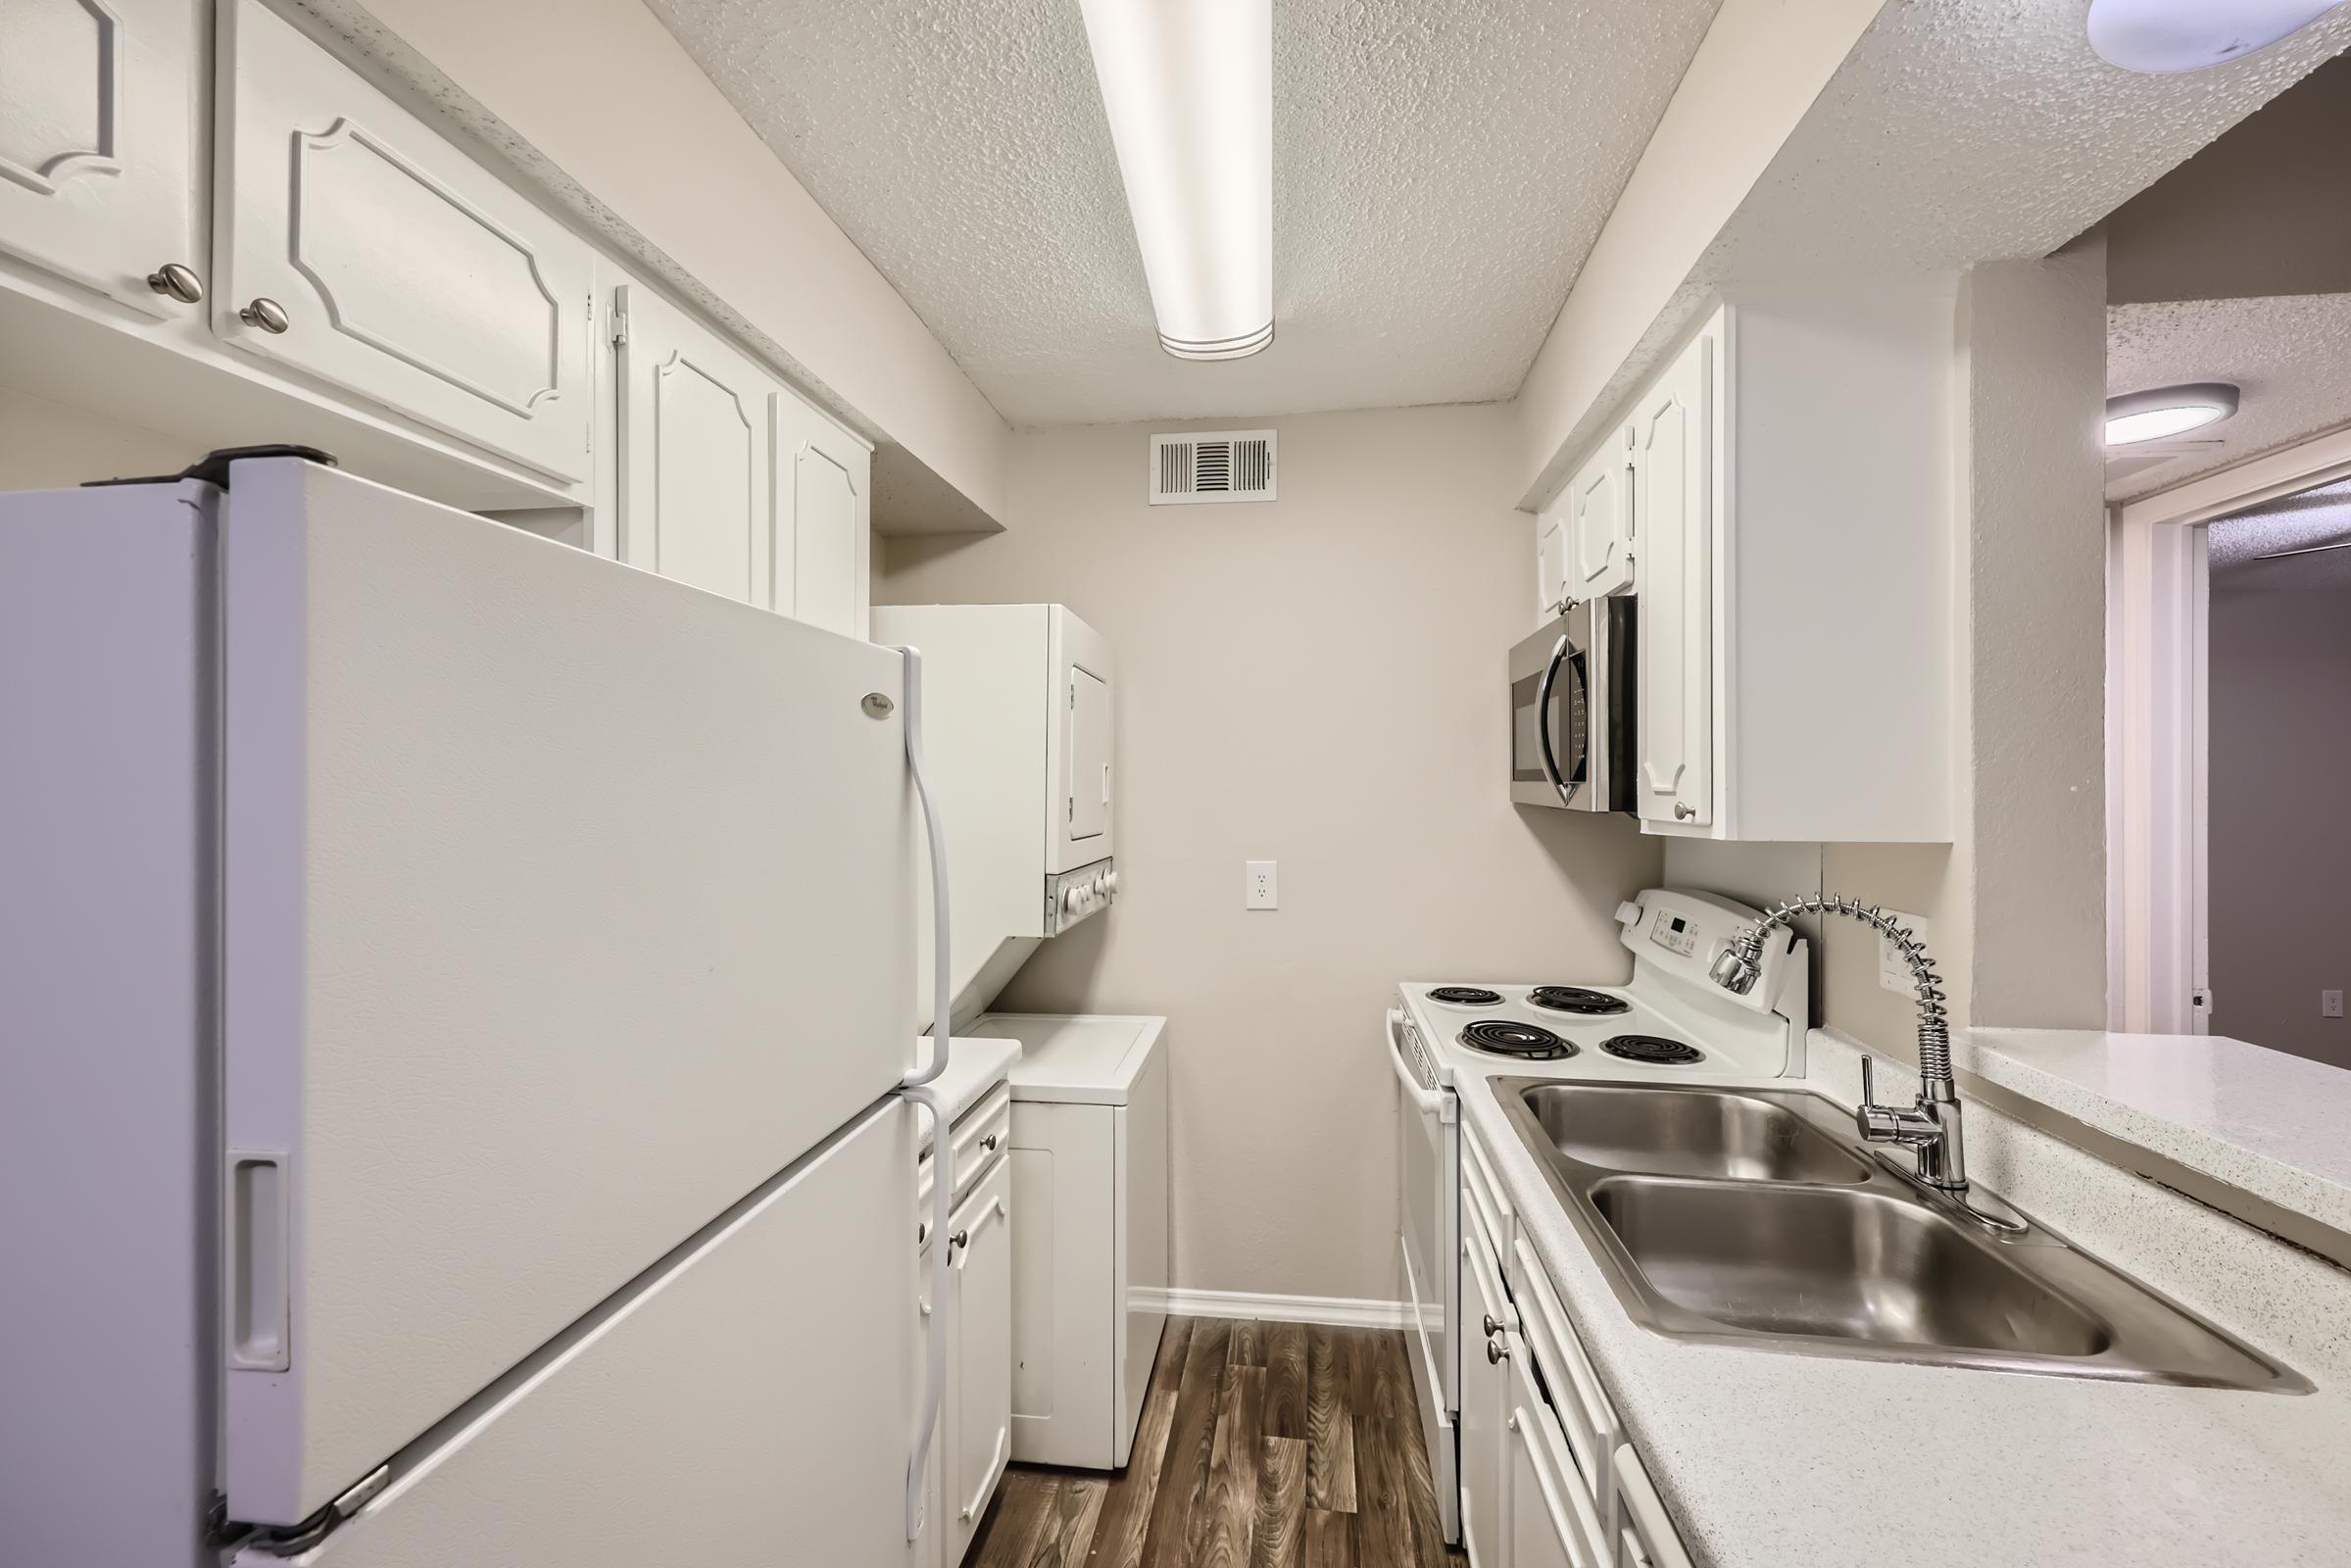 A galley kitchen with white cupboards, white appliances and a view to the living area at Rise Oak Creek.